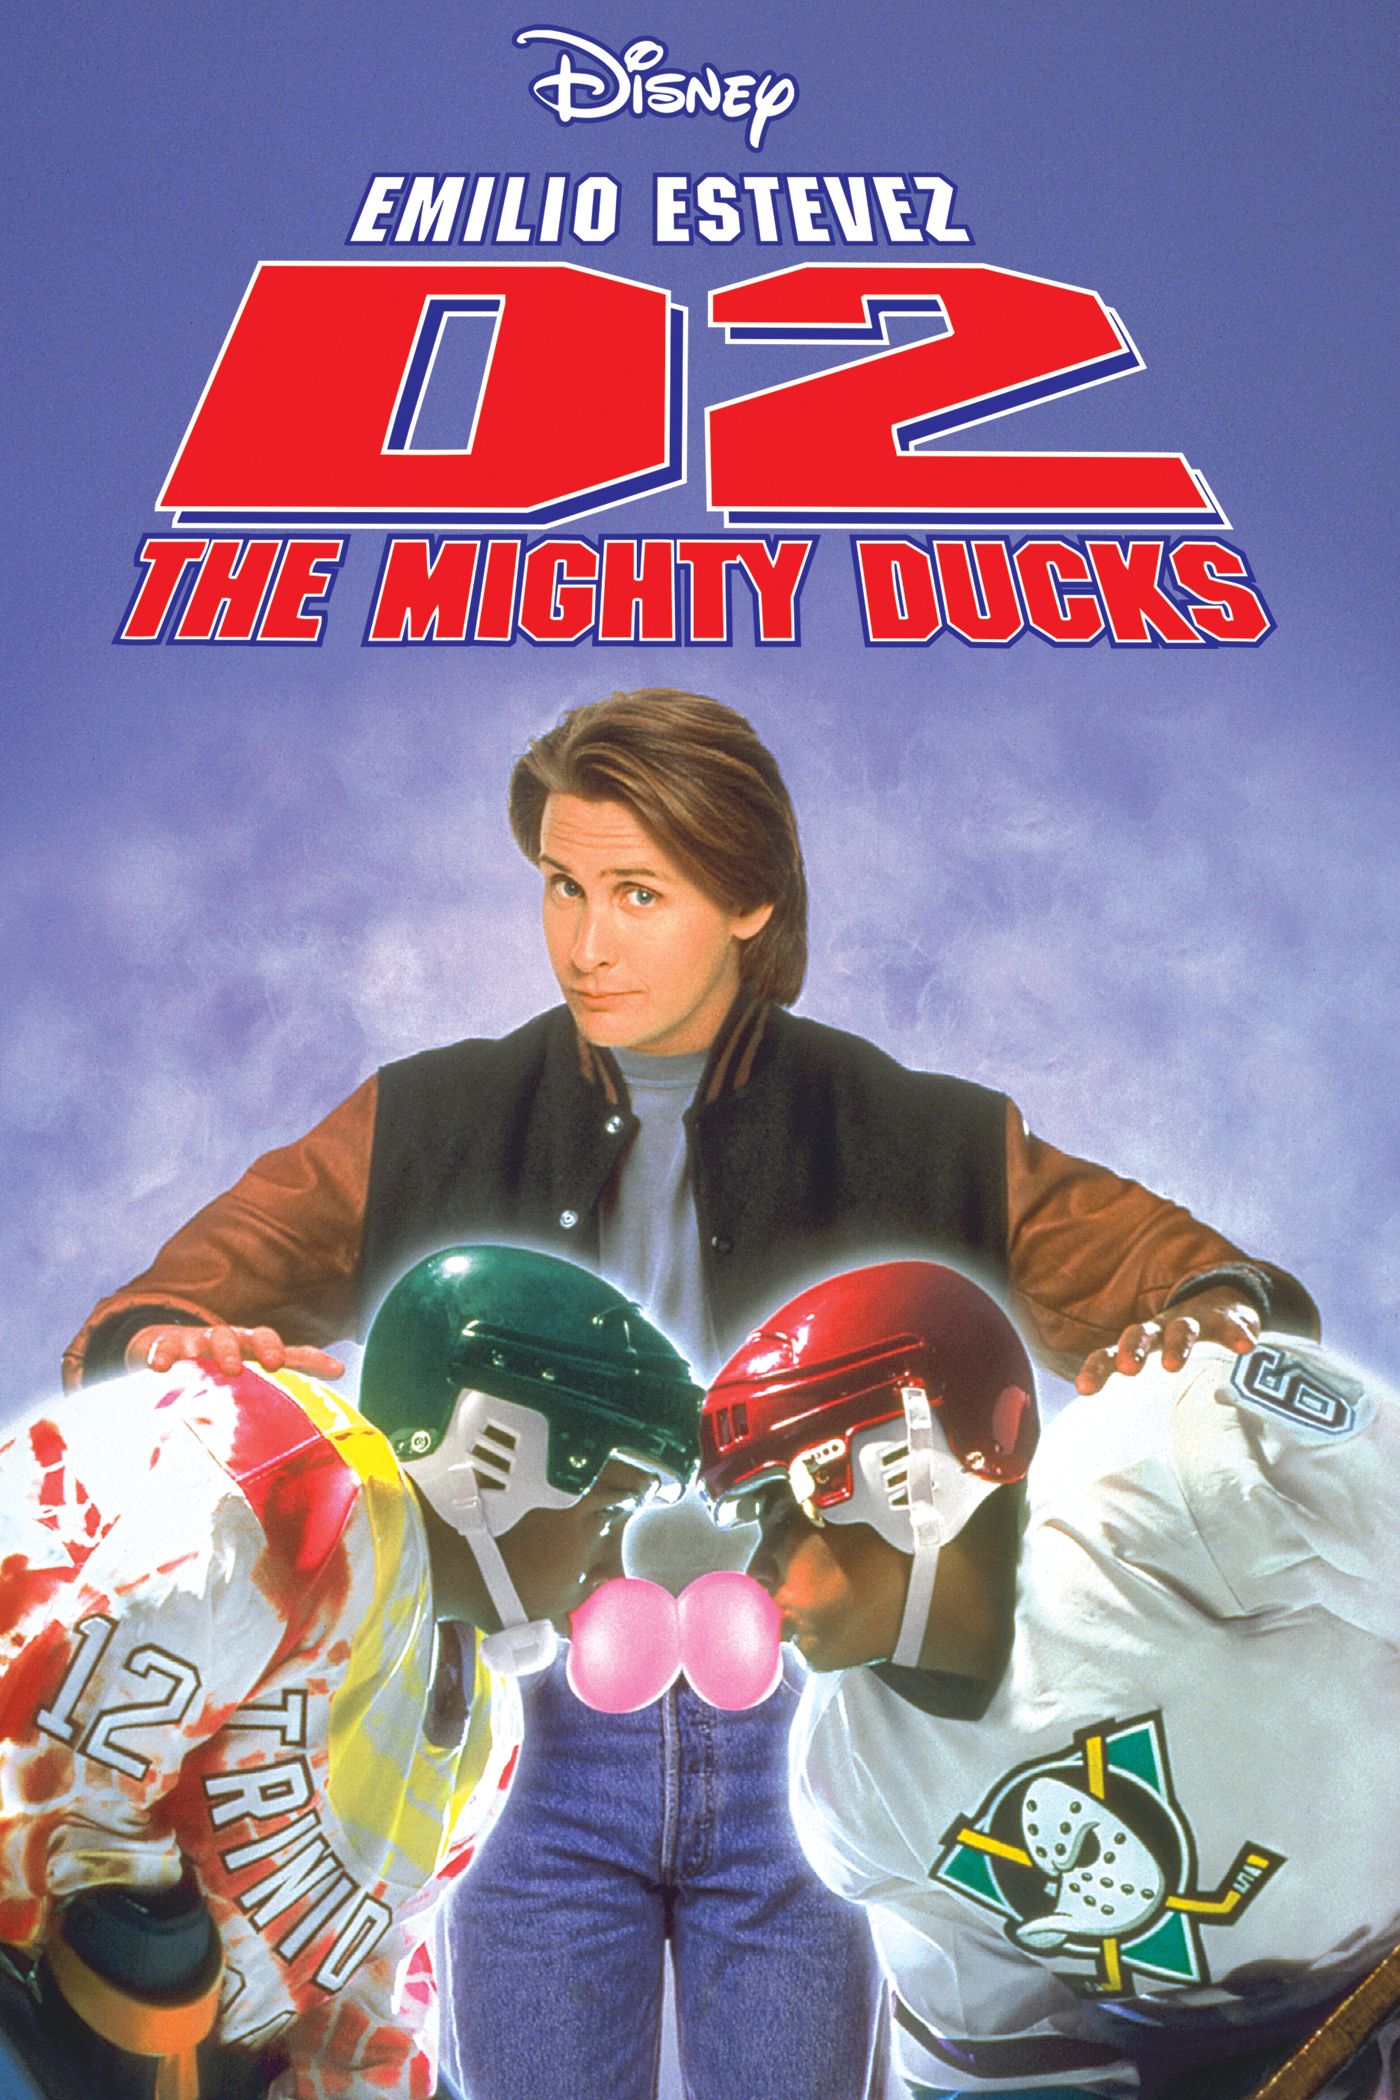 250 The mighty ducks/game changers ideas  d2 the mighty ducks, duck  pictures, duck